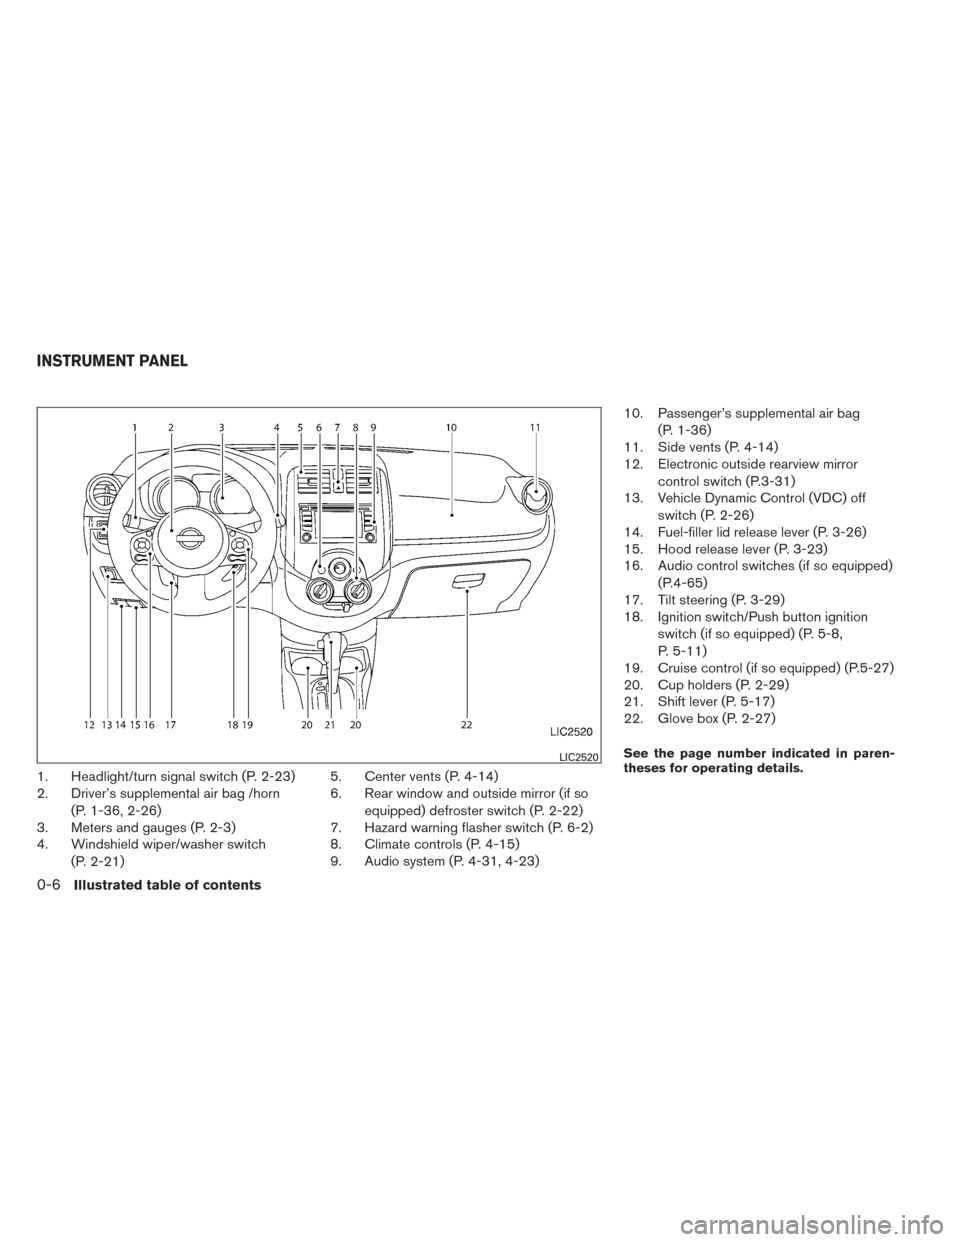 NISSAN VERSA SEDAN 2014 2.G User Guide 1. Headlight/turn signal switch (P. 2-23)
2. Driver’s supplemental air bag /horn(P. 1-36, 2-26)
3. Meters and gauges (P. 2-3)
4. Windshield wiper/washer switch
(P. 2-21) 5. Center vents (P. 4-14)
6.